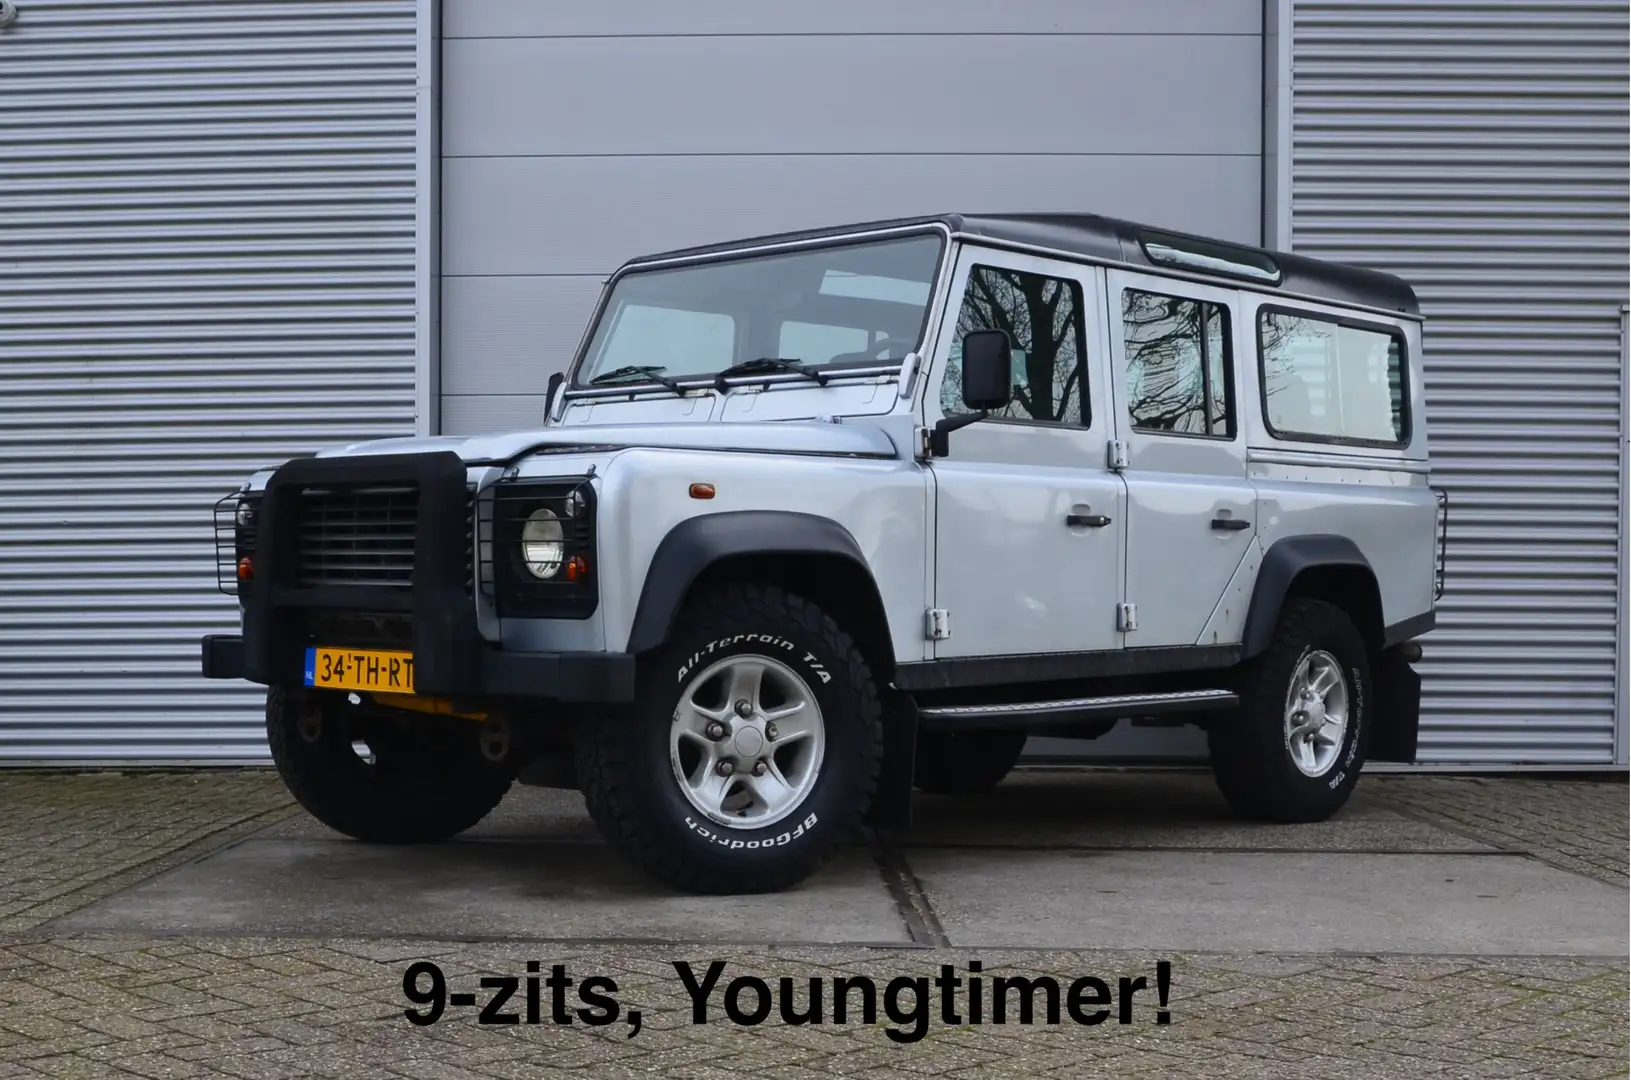 Land Rover Defender 2.5 TD5 110 SW XTech 9-zits, Youngtimer! fin. 542, Szary - 1